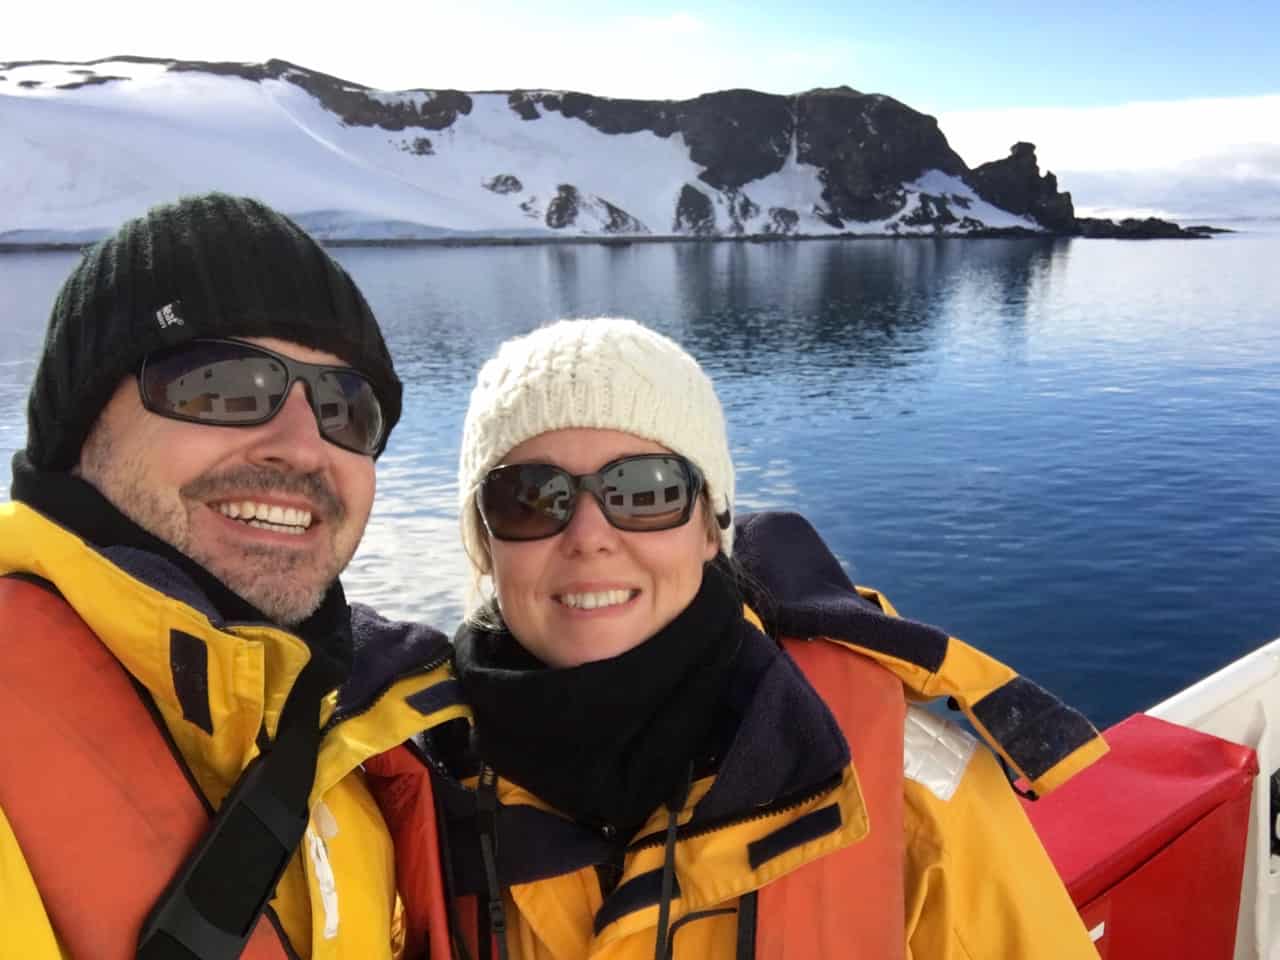 Couple on a ship arriving in Antarctica.